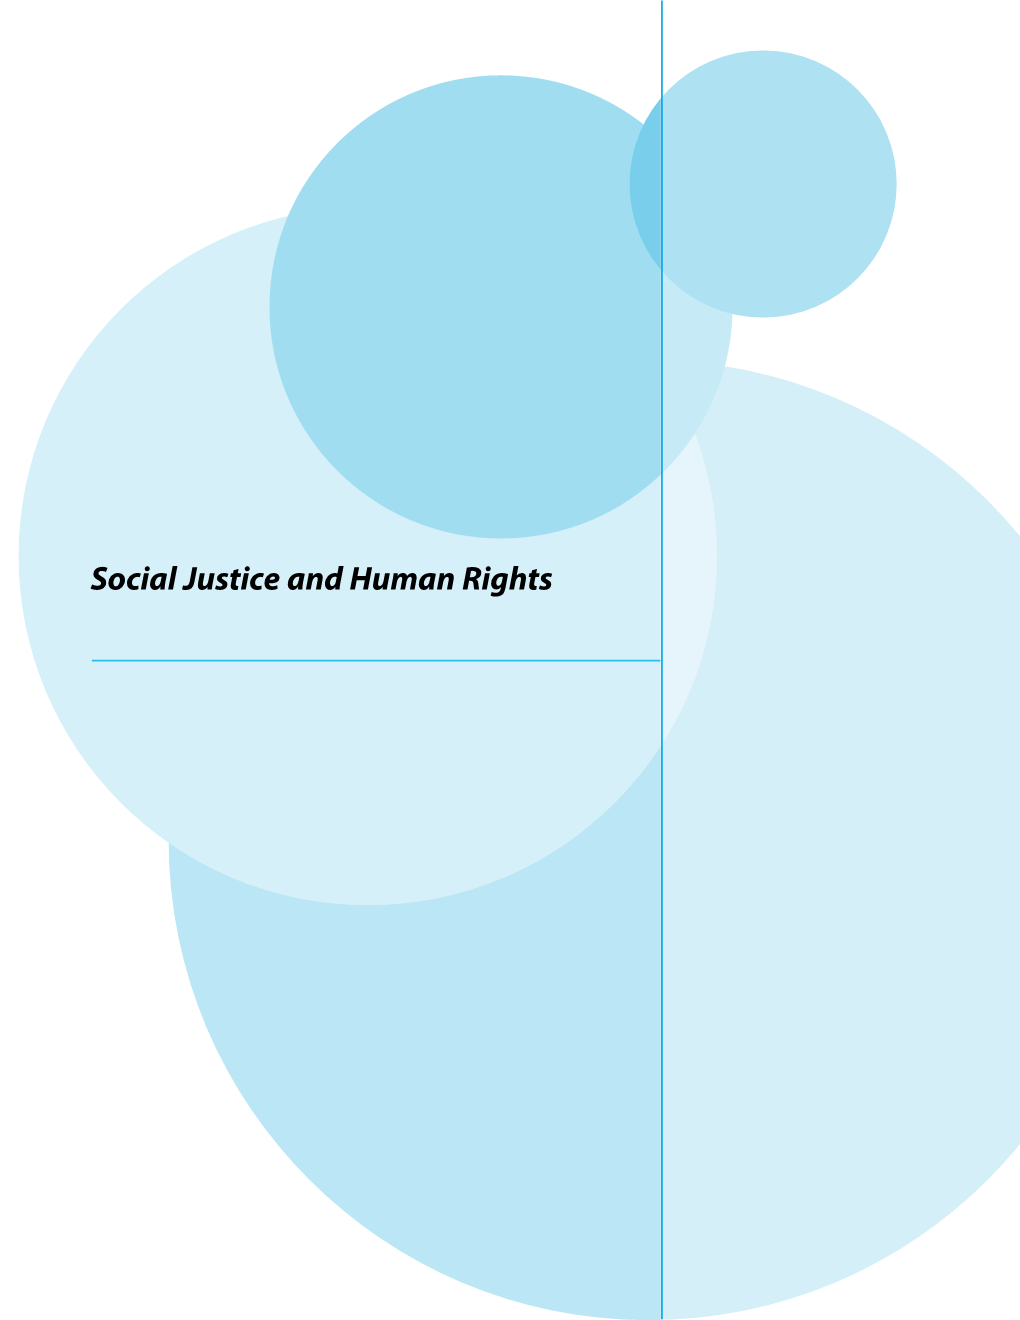 Social Justice and Human Rights